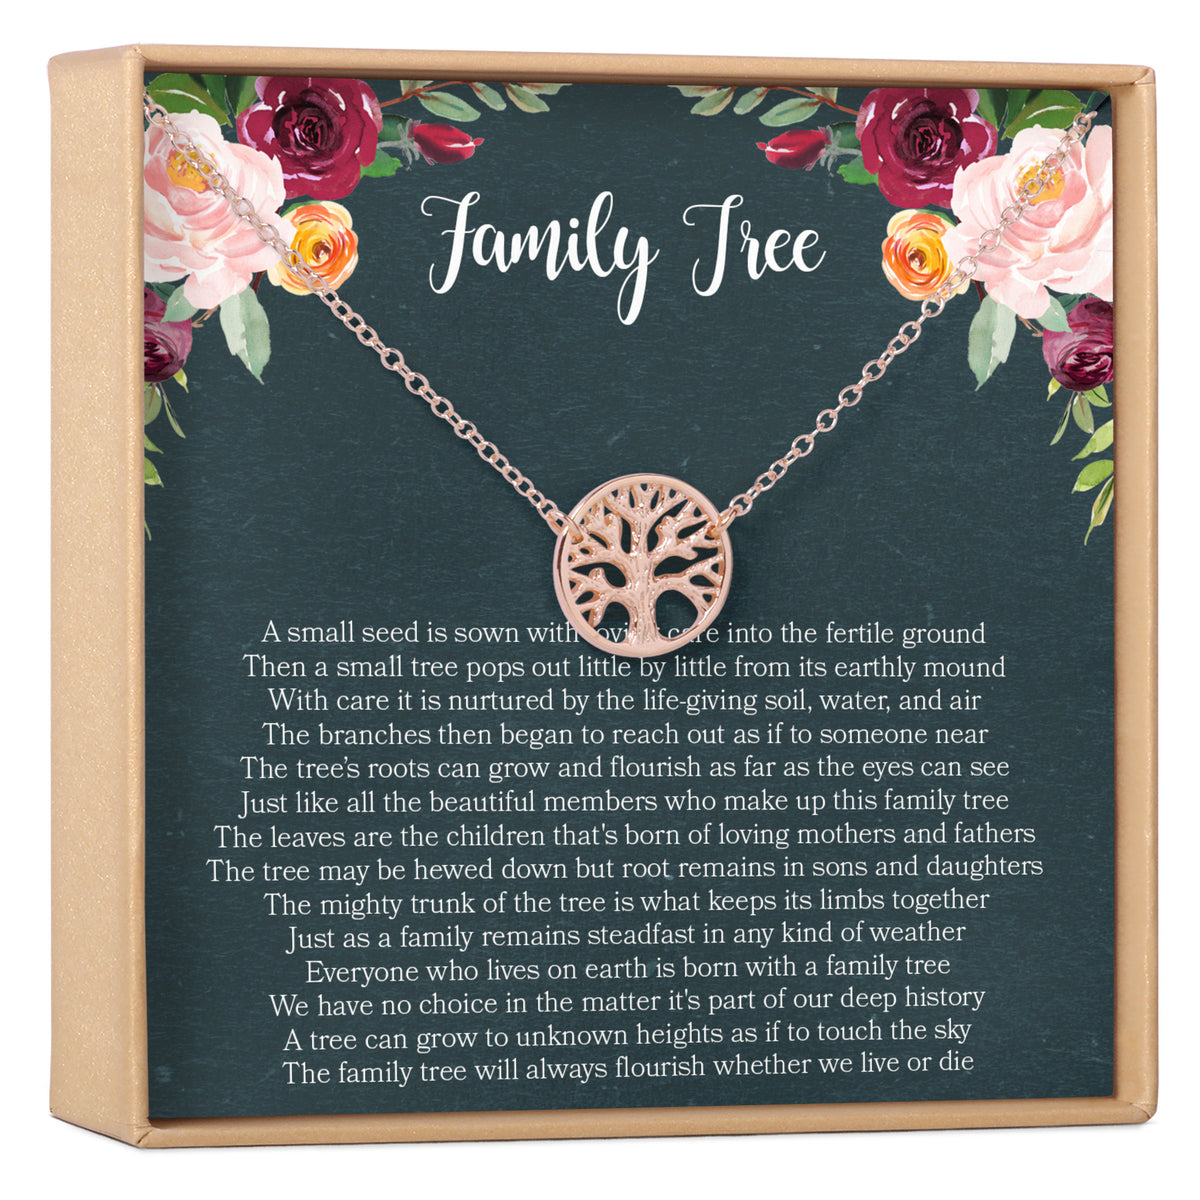 Family Tree Necklace Gift